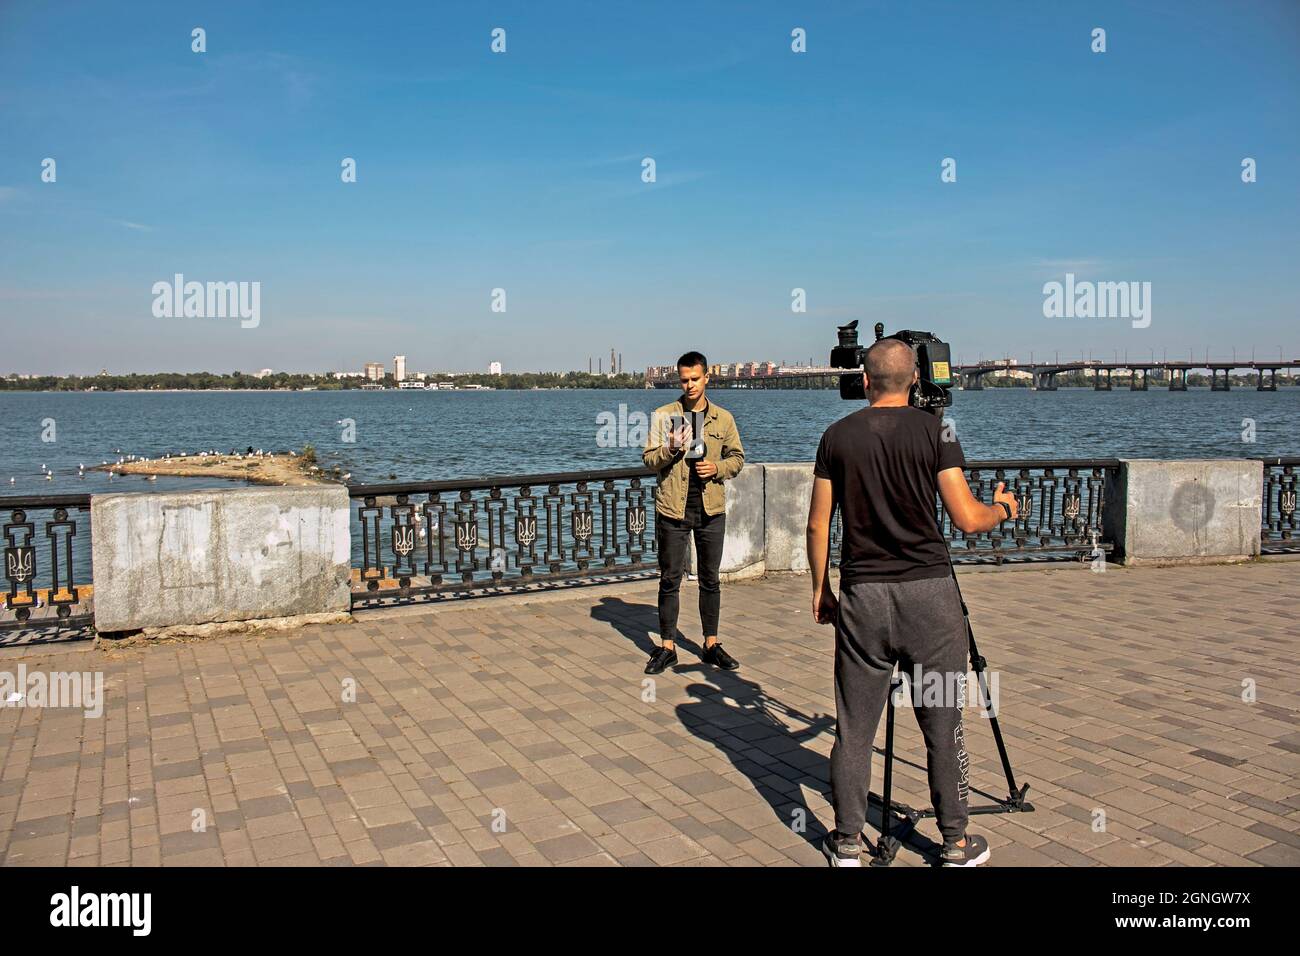 Dnepropetrovsk, Ukraine - 09.17.2021: Local TV journalists are filming an environmental issue. A new island was formed on the Dnieper River. Stock Photo